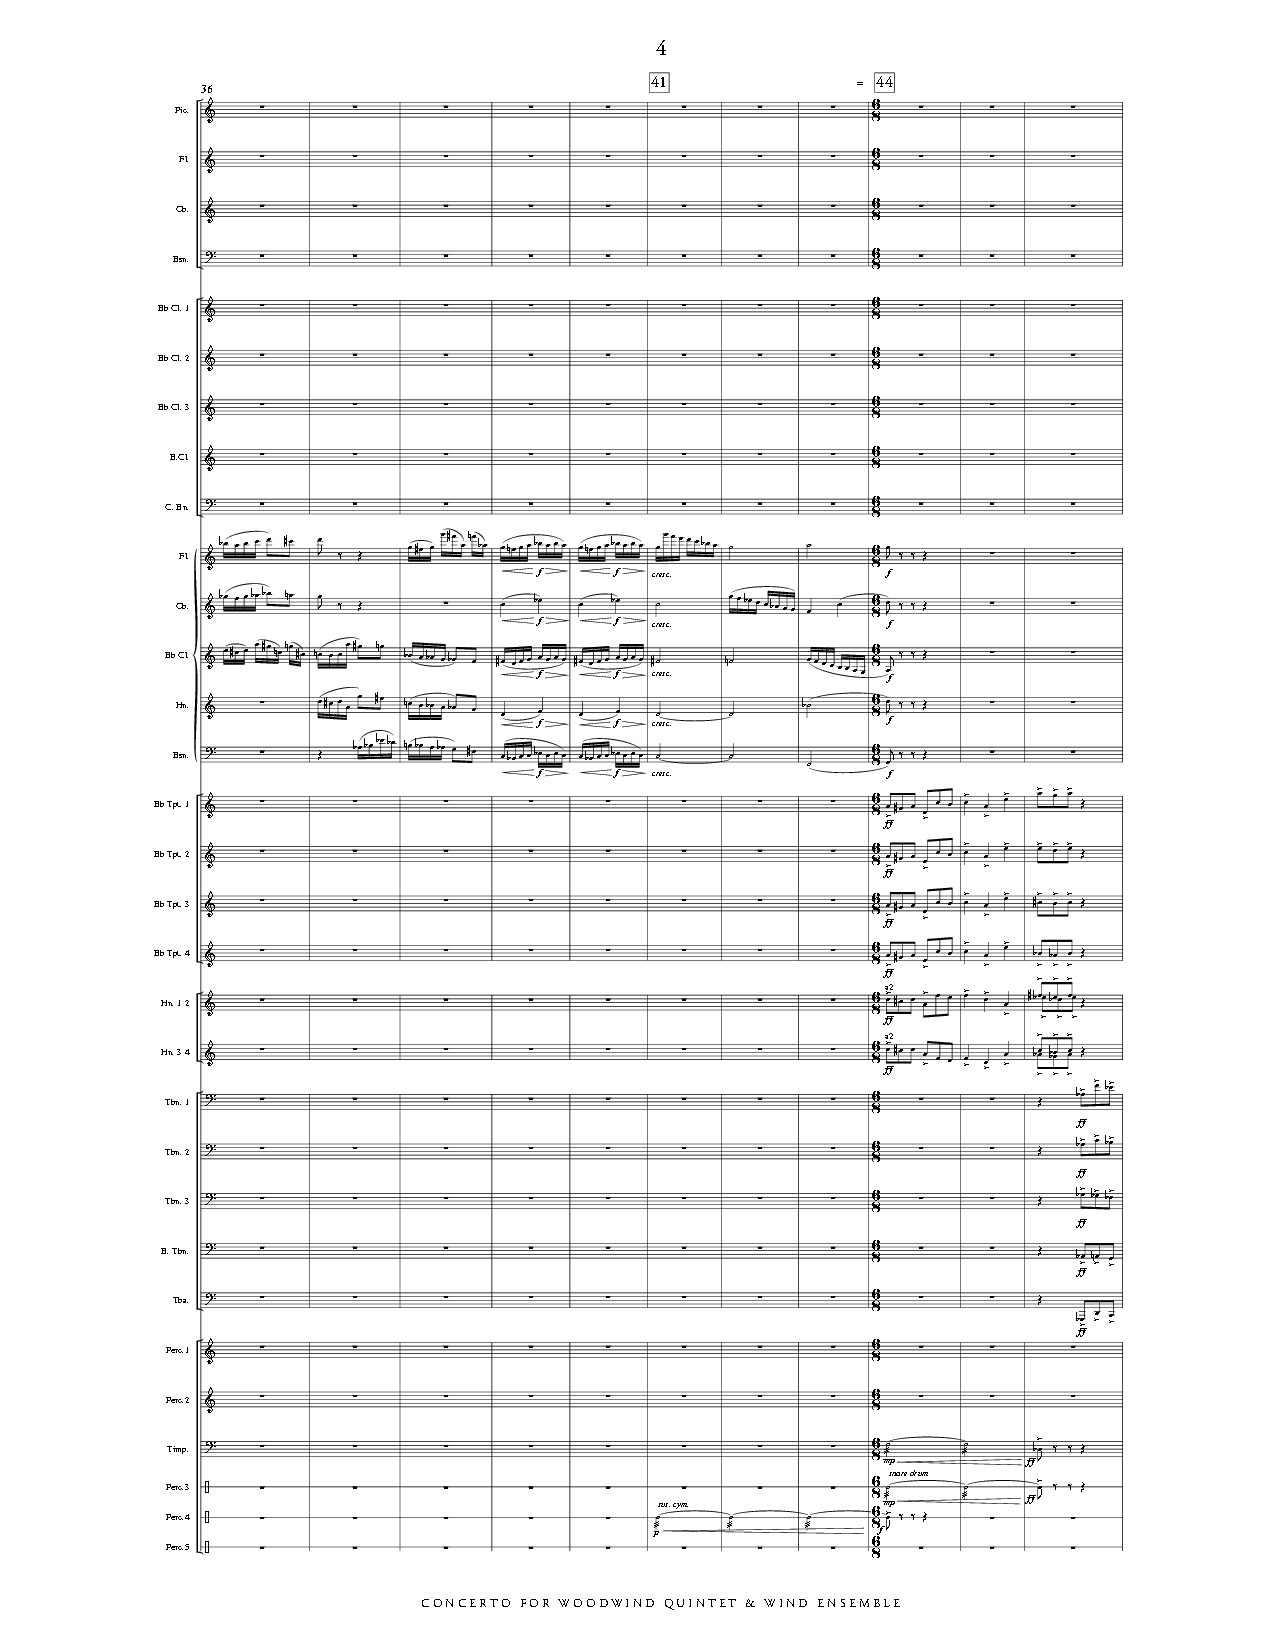 Concerto for Woodwind Quintet and Wind Ensemble